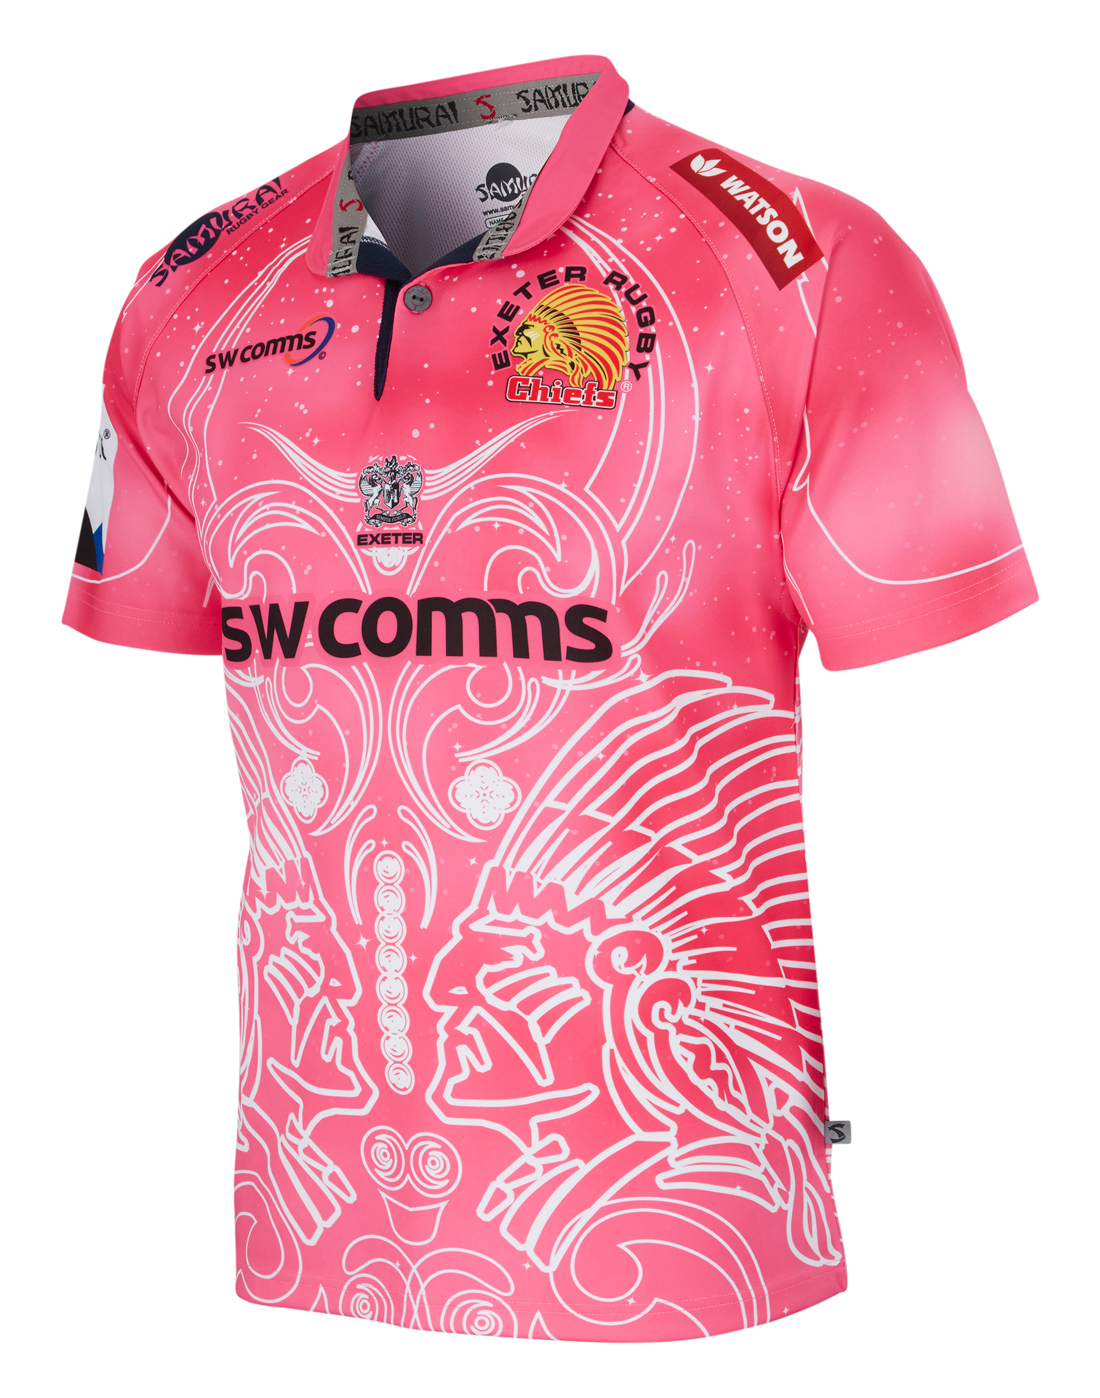 exeter rugby jersey